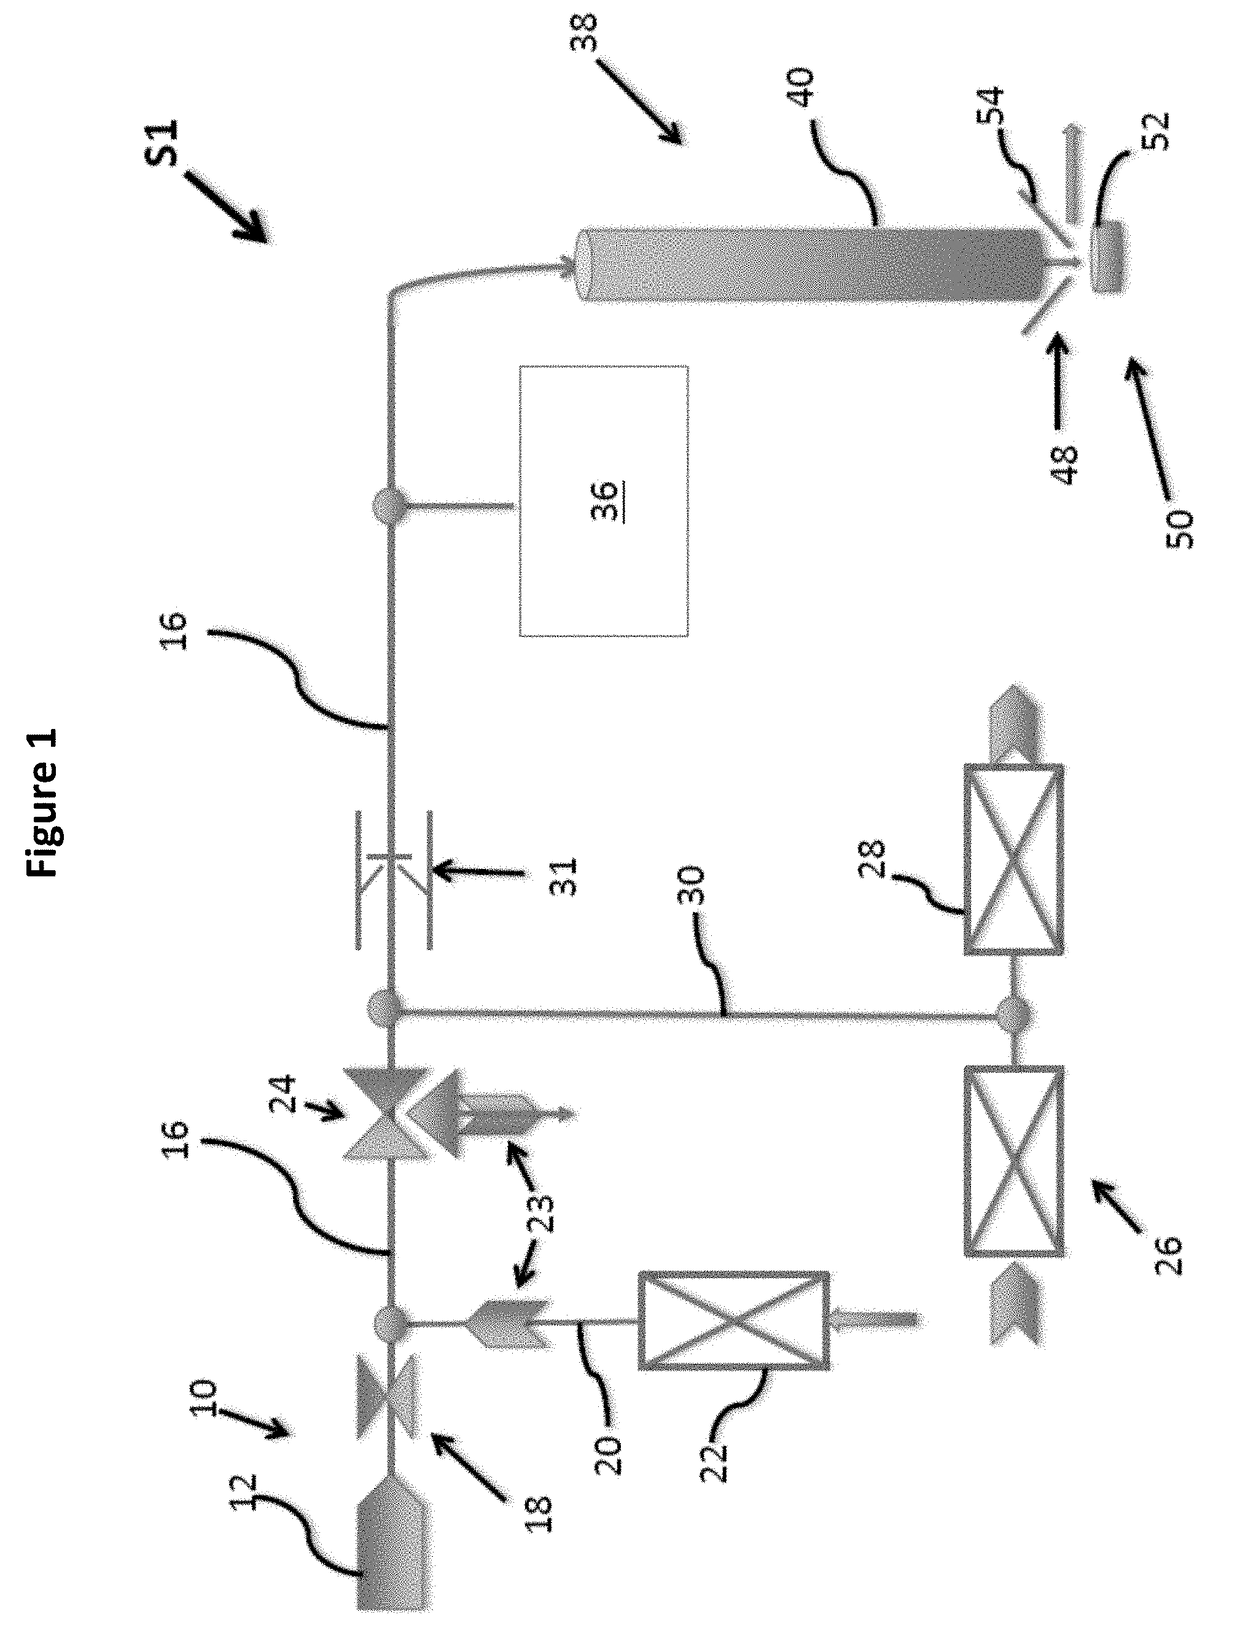 Aerosol Collection System and Method